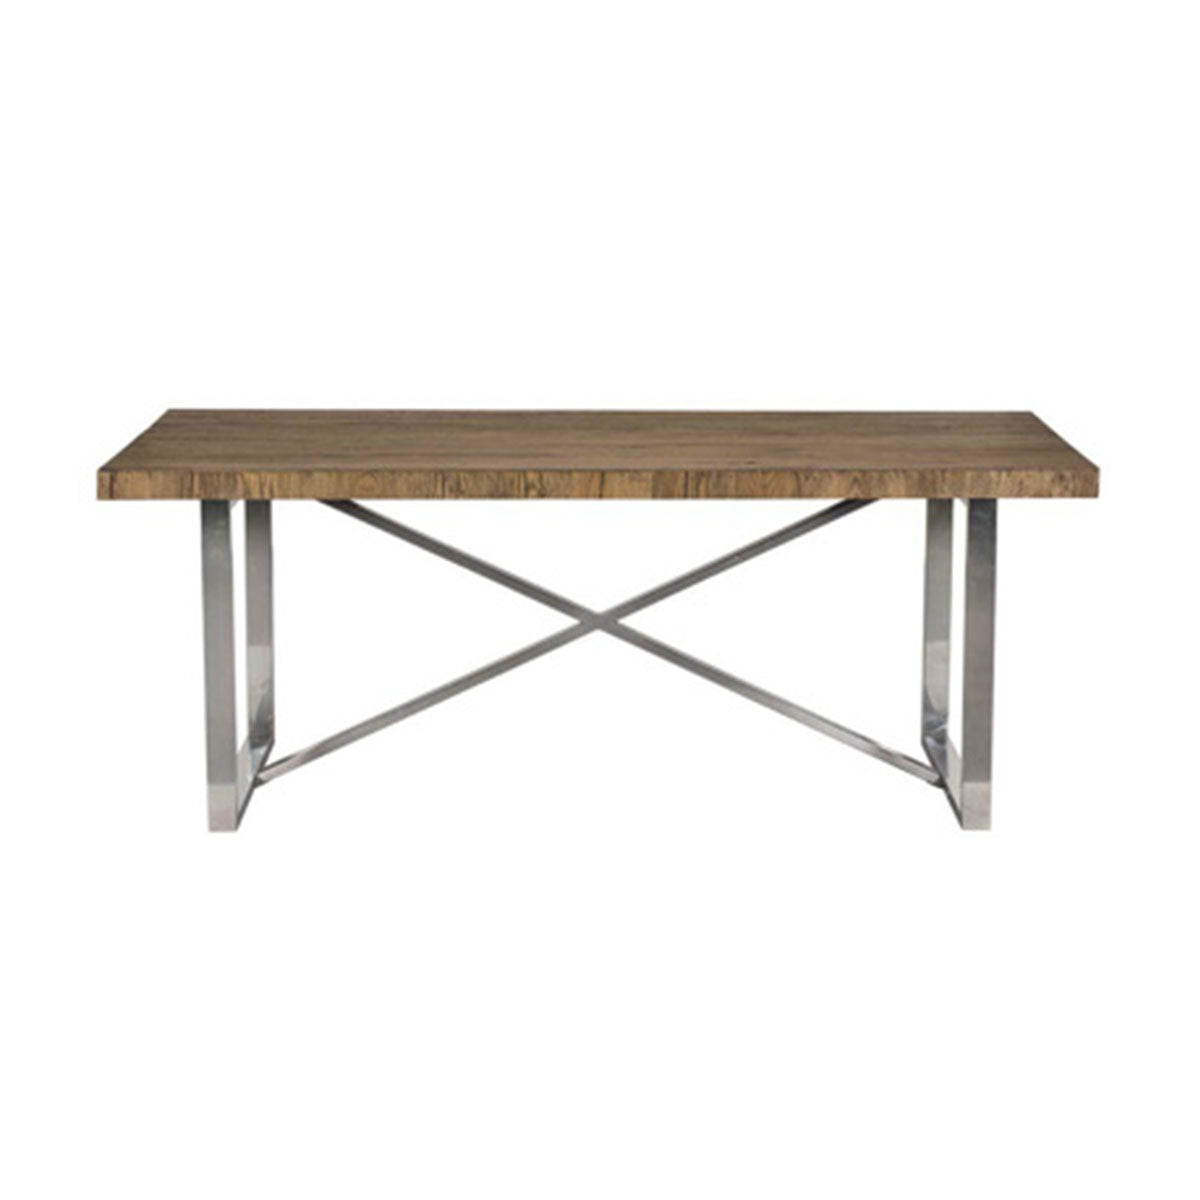 Natural Oak Wooden Dining Table Various Sizes